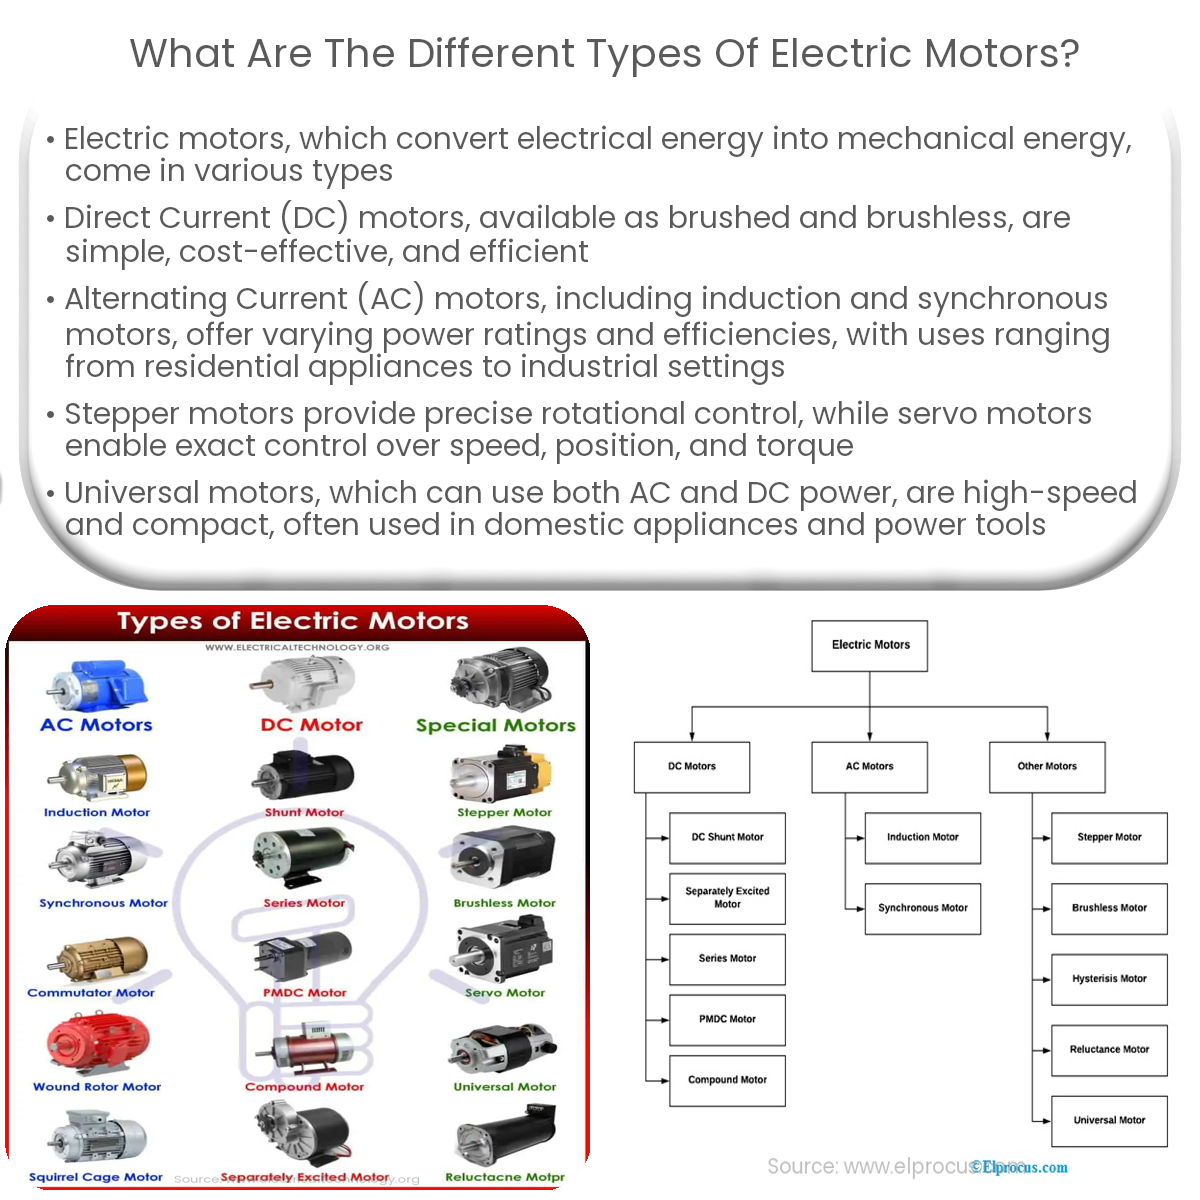 What are the different types of electric motors?